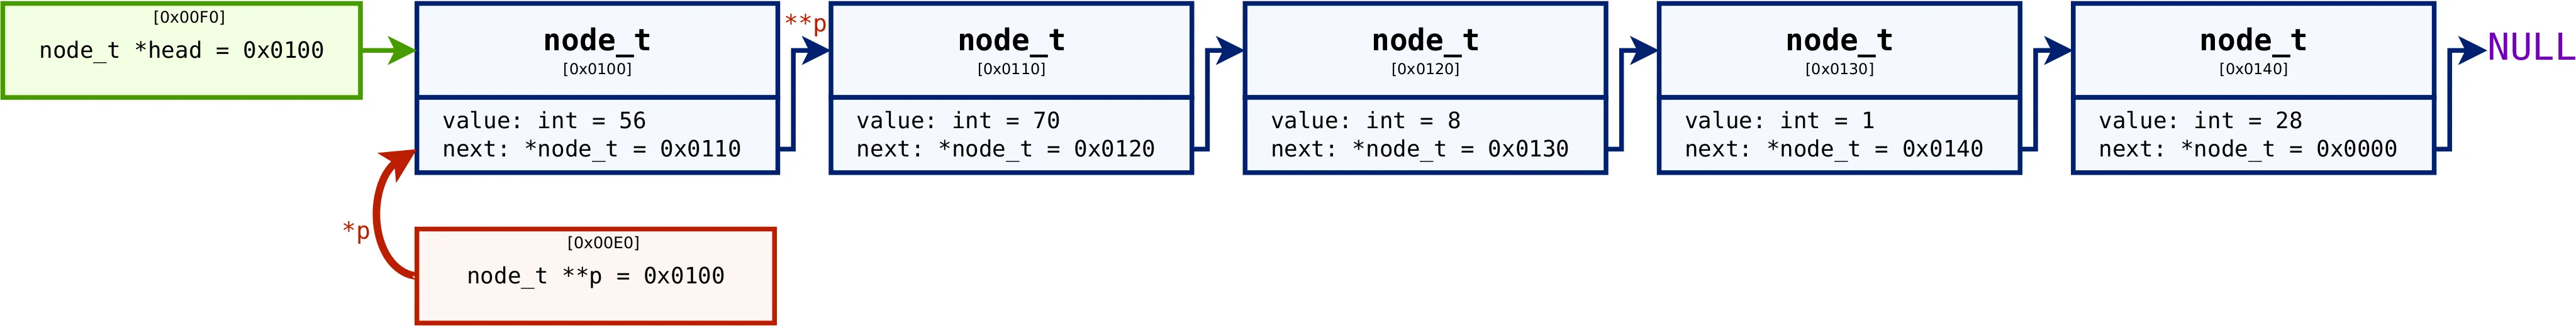 Singly-linked list example #3